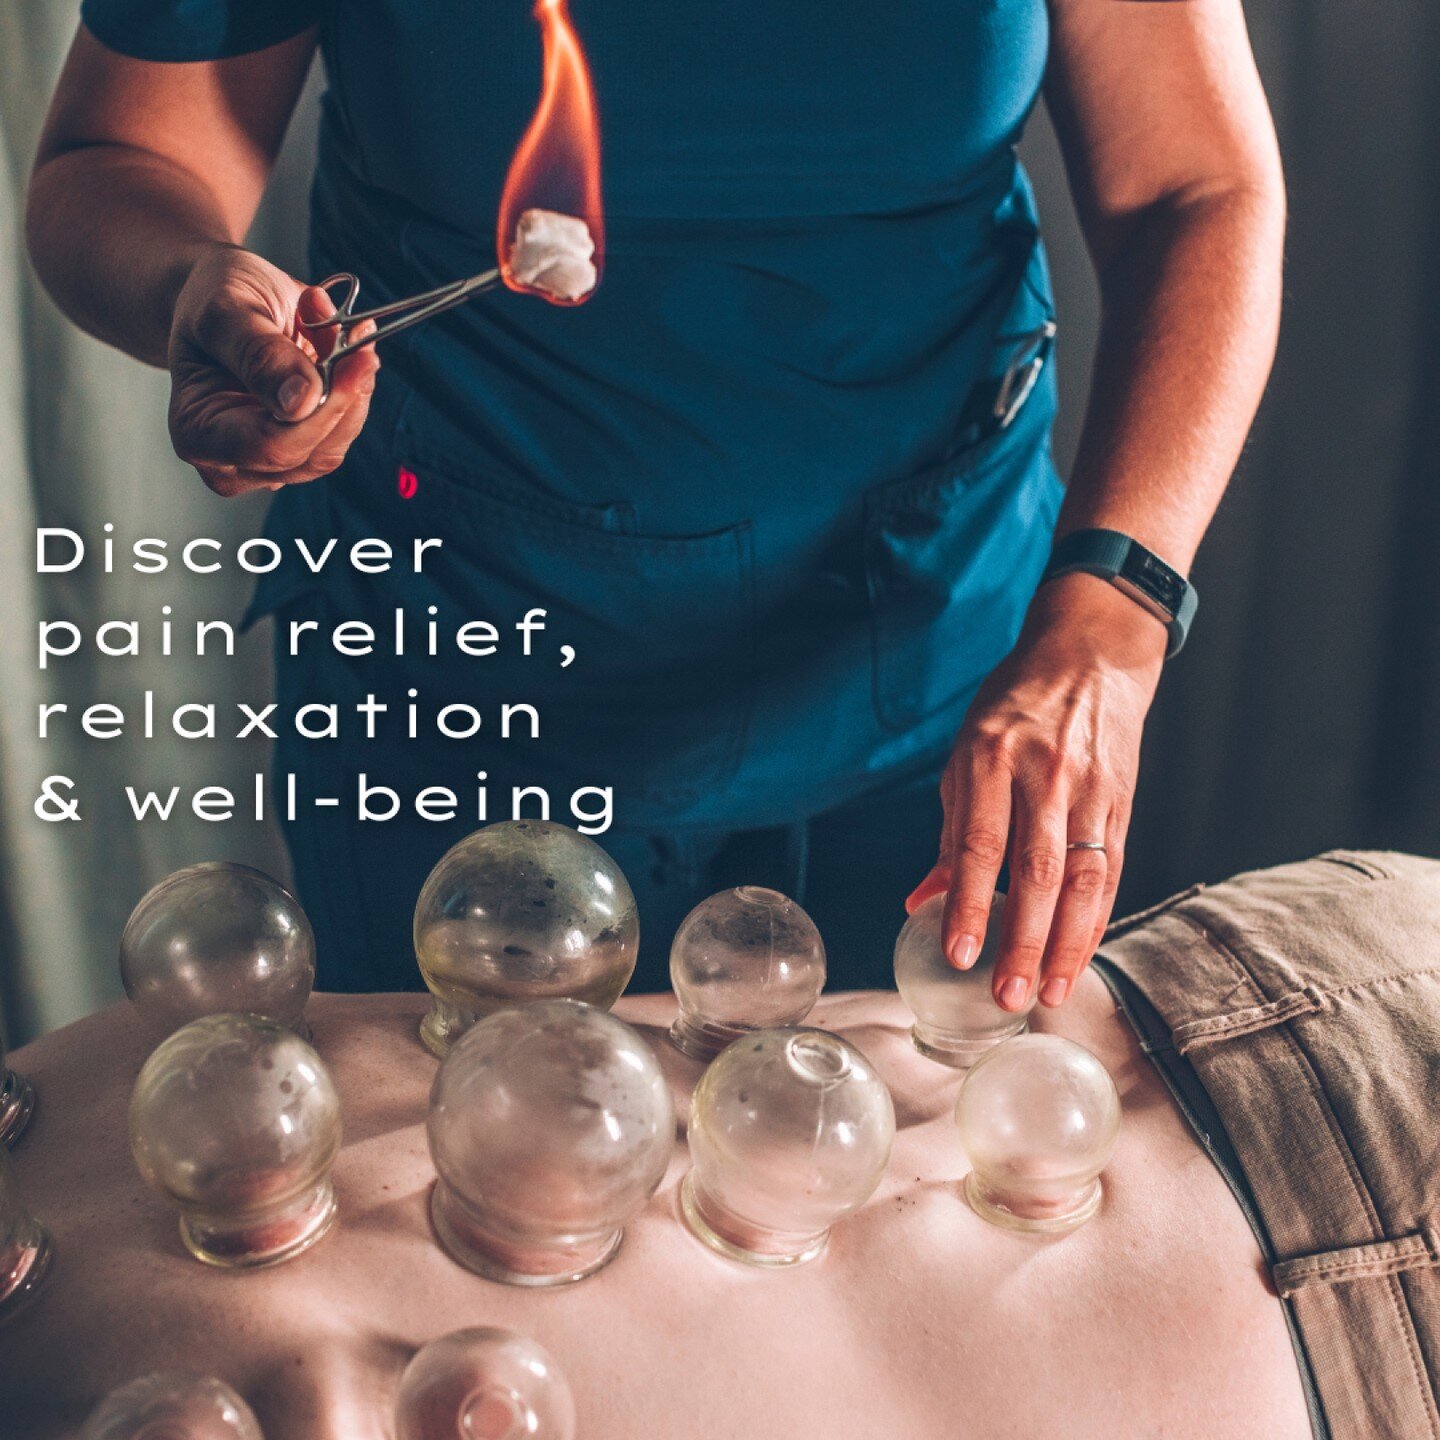 Cupping therapy has been popularized in recent years by athletes and celebrities, but it&rsquo;s not new. It dates back to ancient Egyptian, Chinese, and Middle Eastern cultures. 
🔥 
The cups create suction, and this suction creates movement of ener